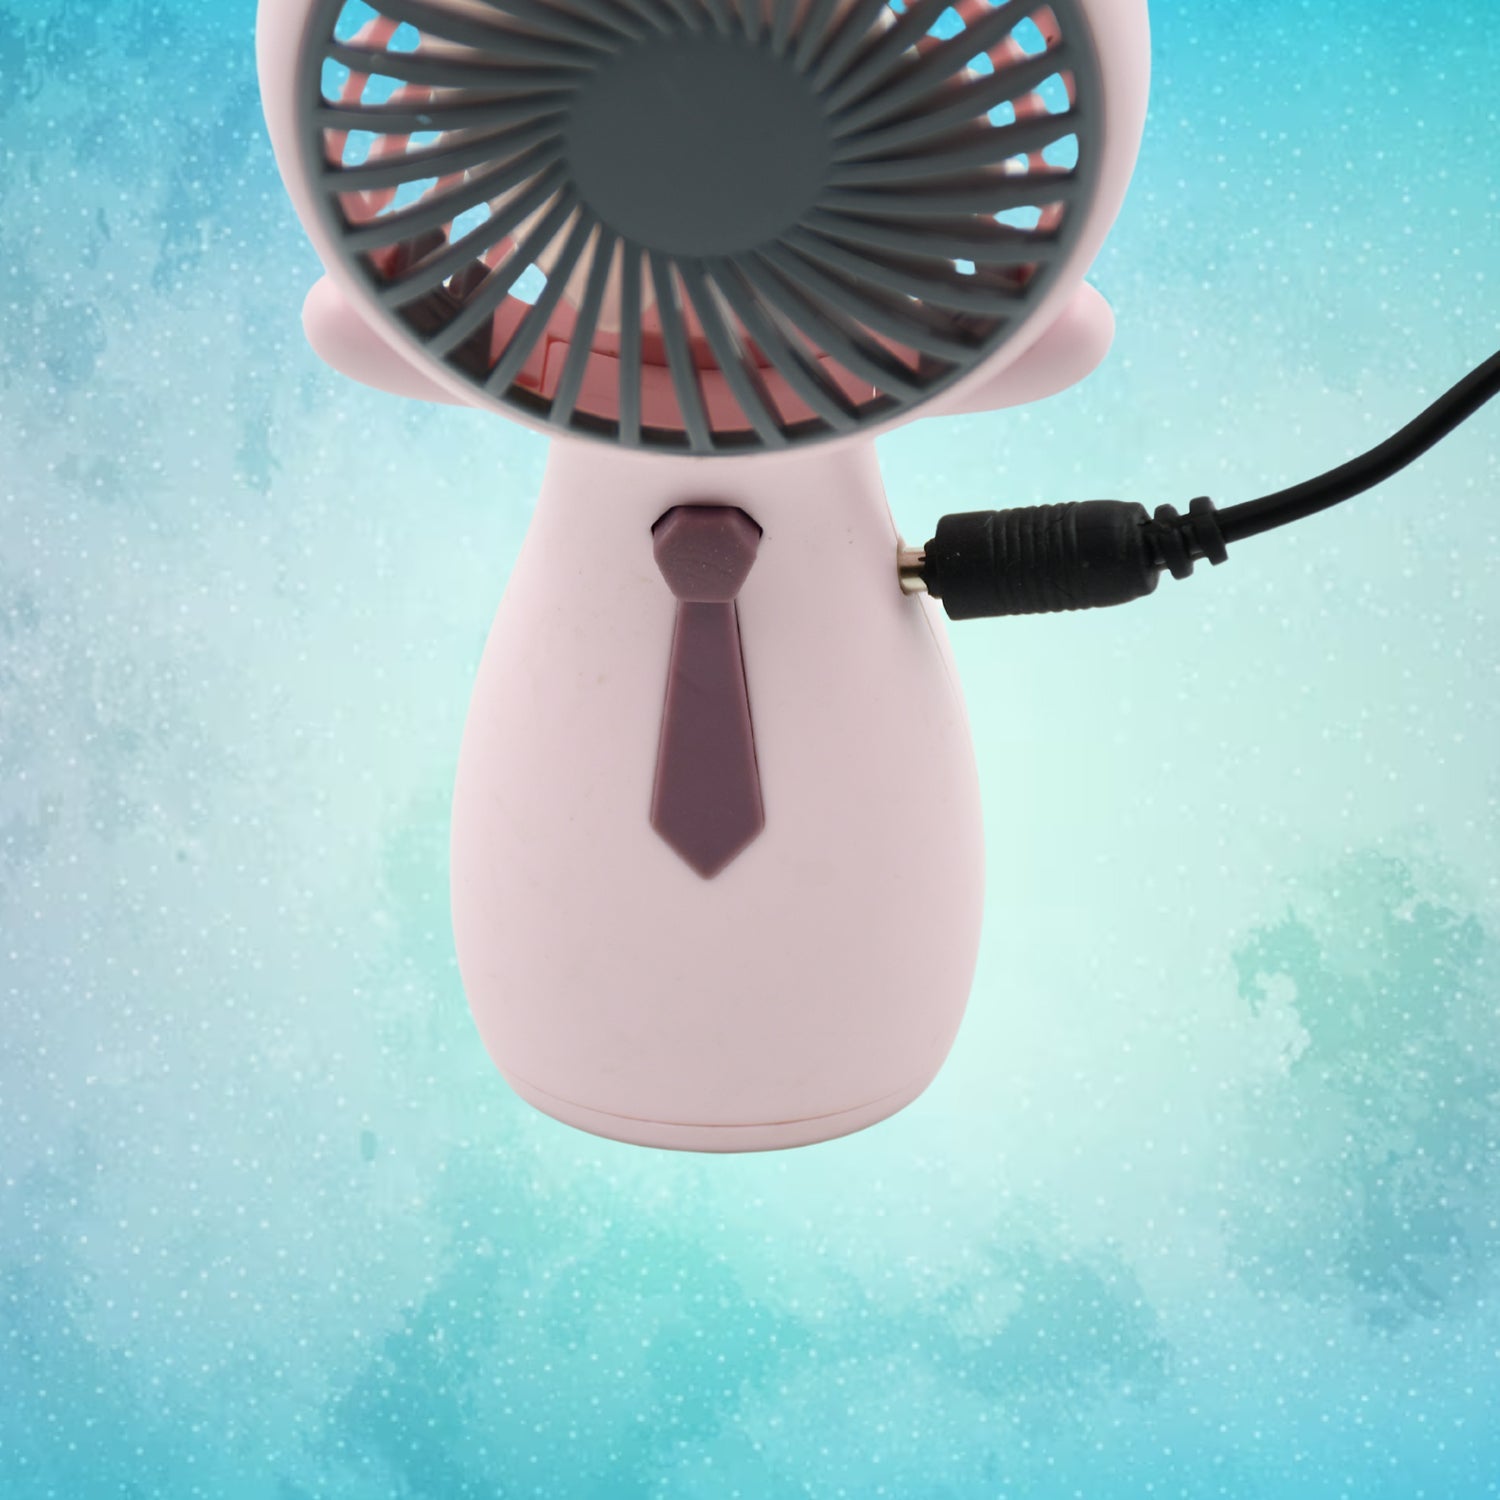 17713 Portable Small Electric Fan Handheld, Rechargeable Mini Student Handheld Dormitory Class Personal Fan